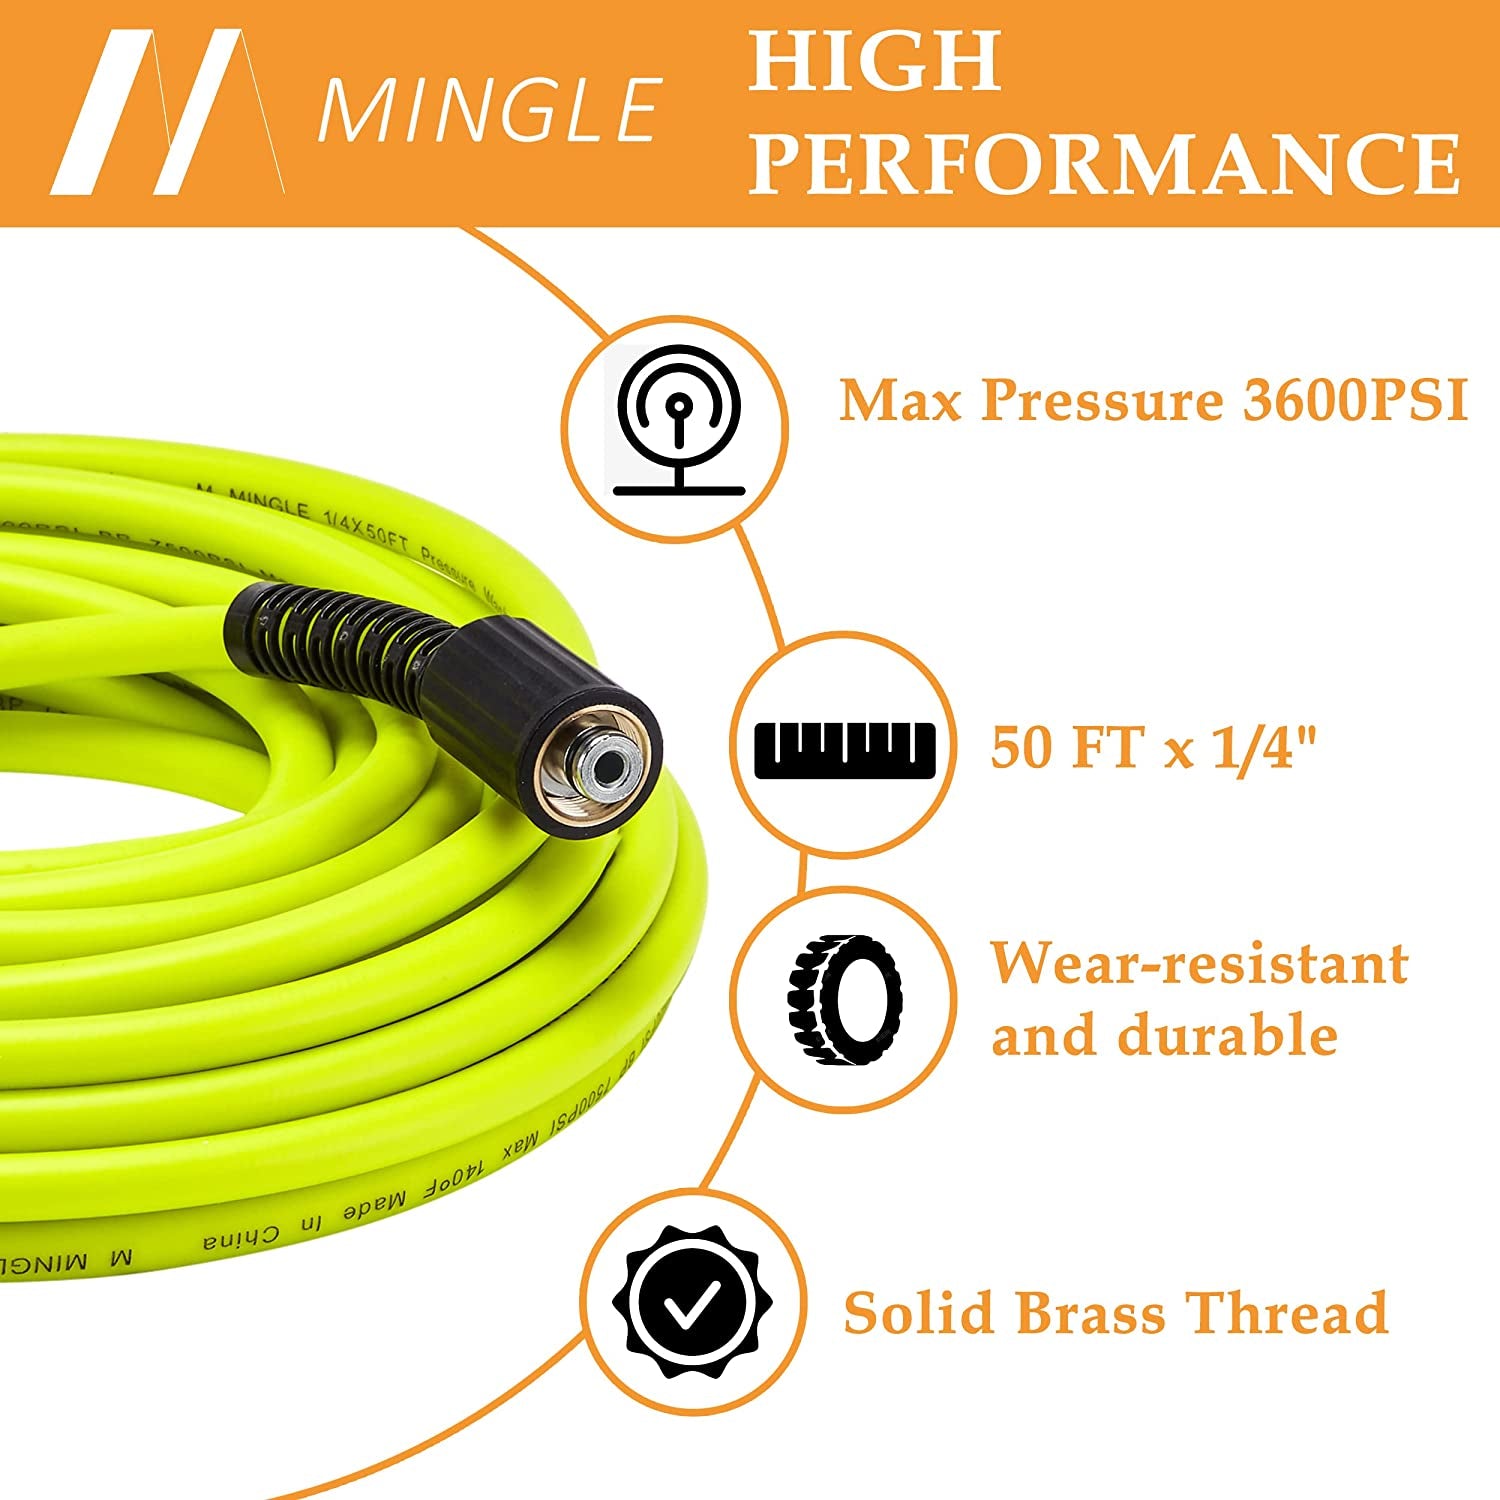 M MINGLE, M MINGLE Pressure Washer Hose 50 FT X 1/4" - Replacement Power Wash Hose with Quick Connect Kits - High Pressure Hose with M22 14Mm Fittings - 3600PSI